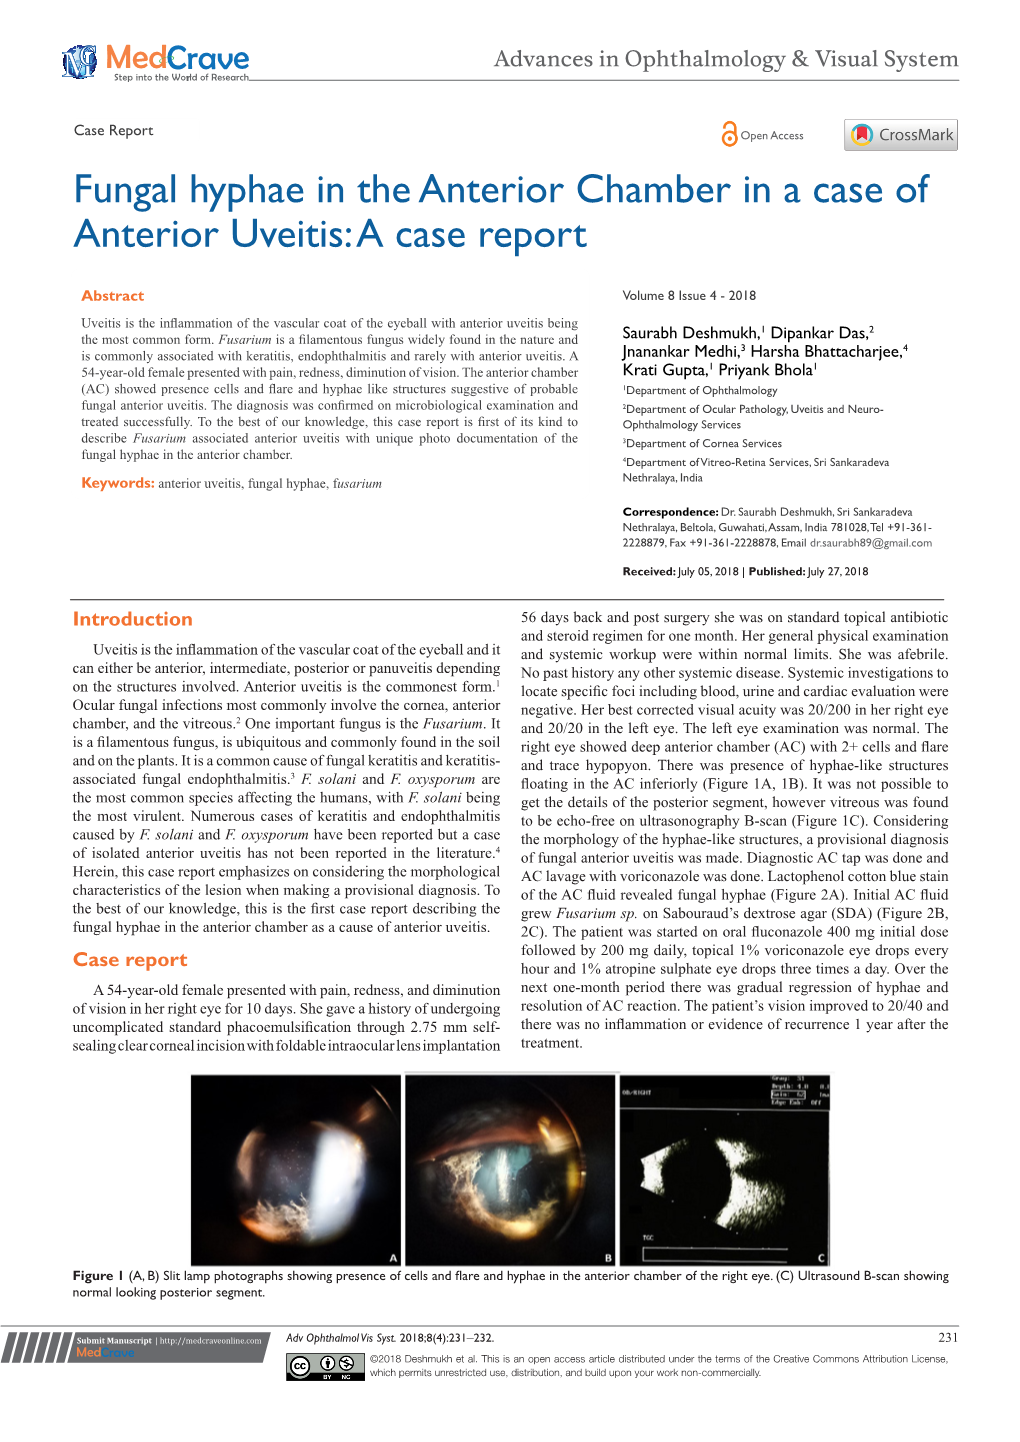 Fungal Hyphae in the Anterior Chamber in a Case of Anterior Uveitis: a Case Report